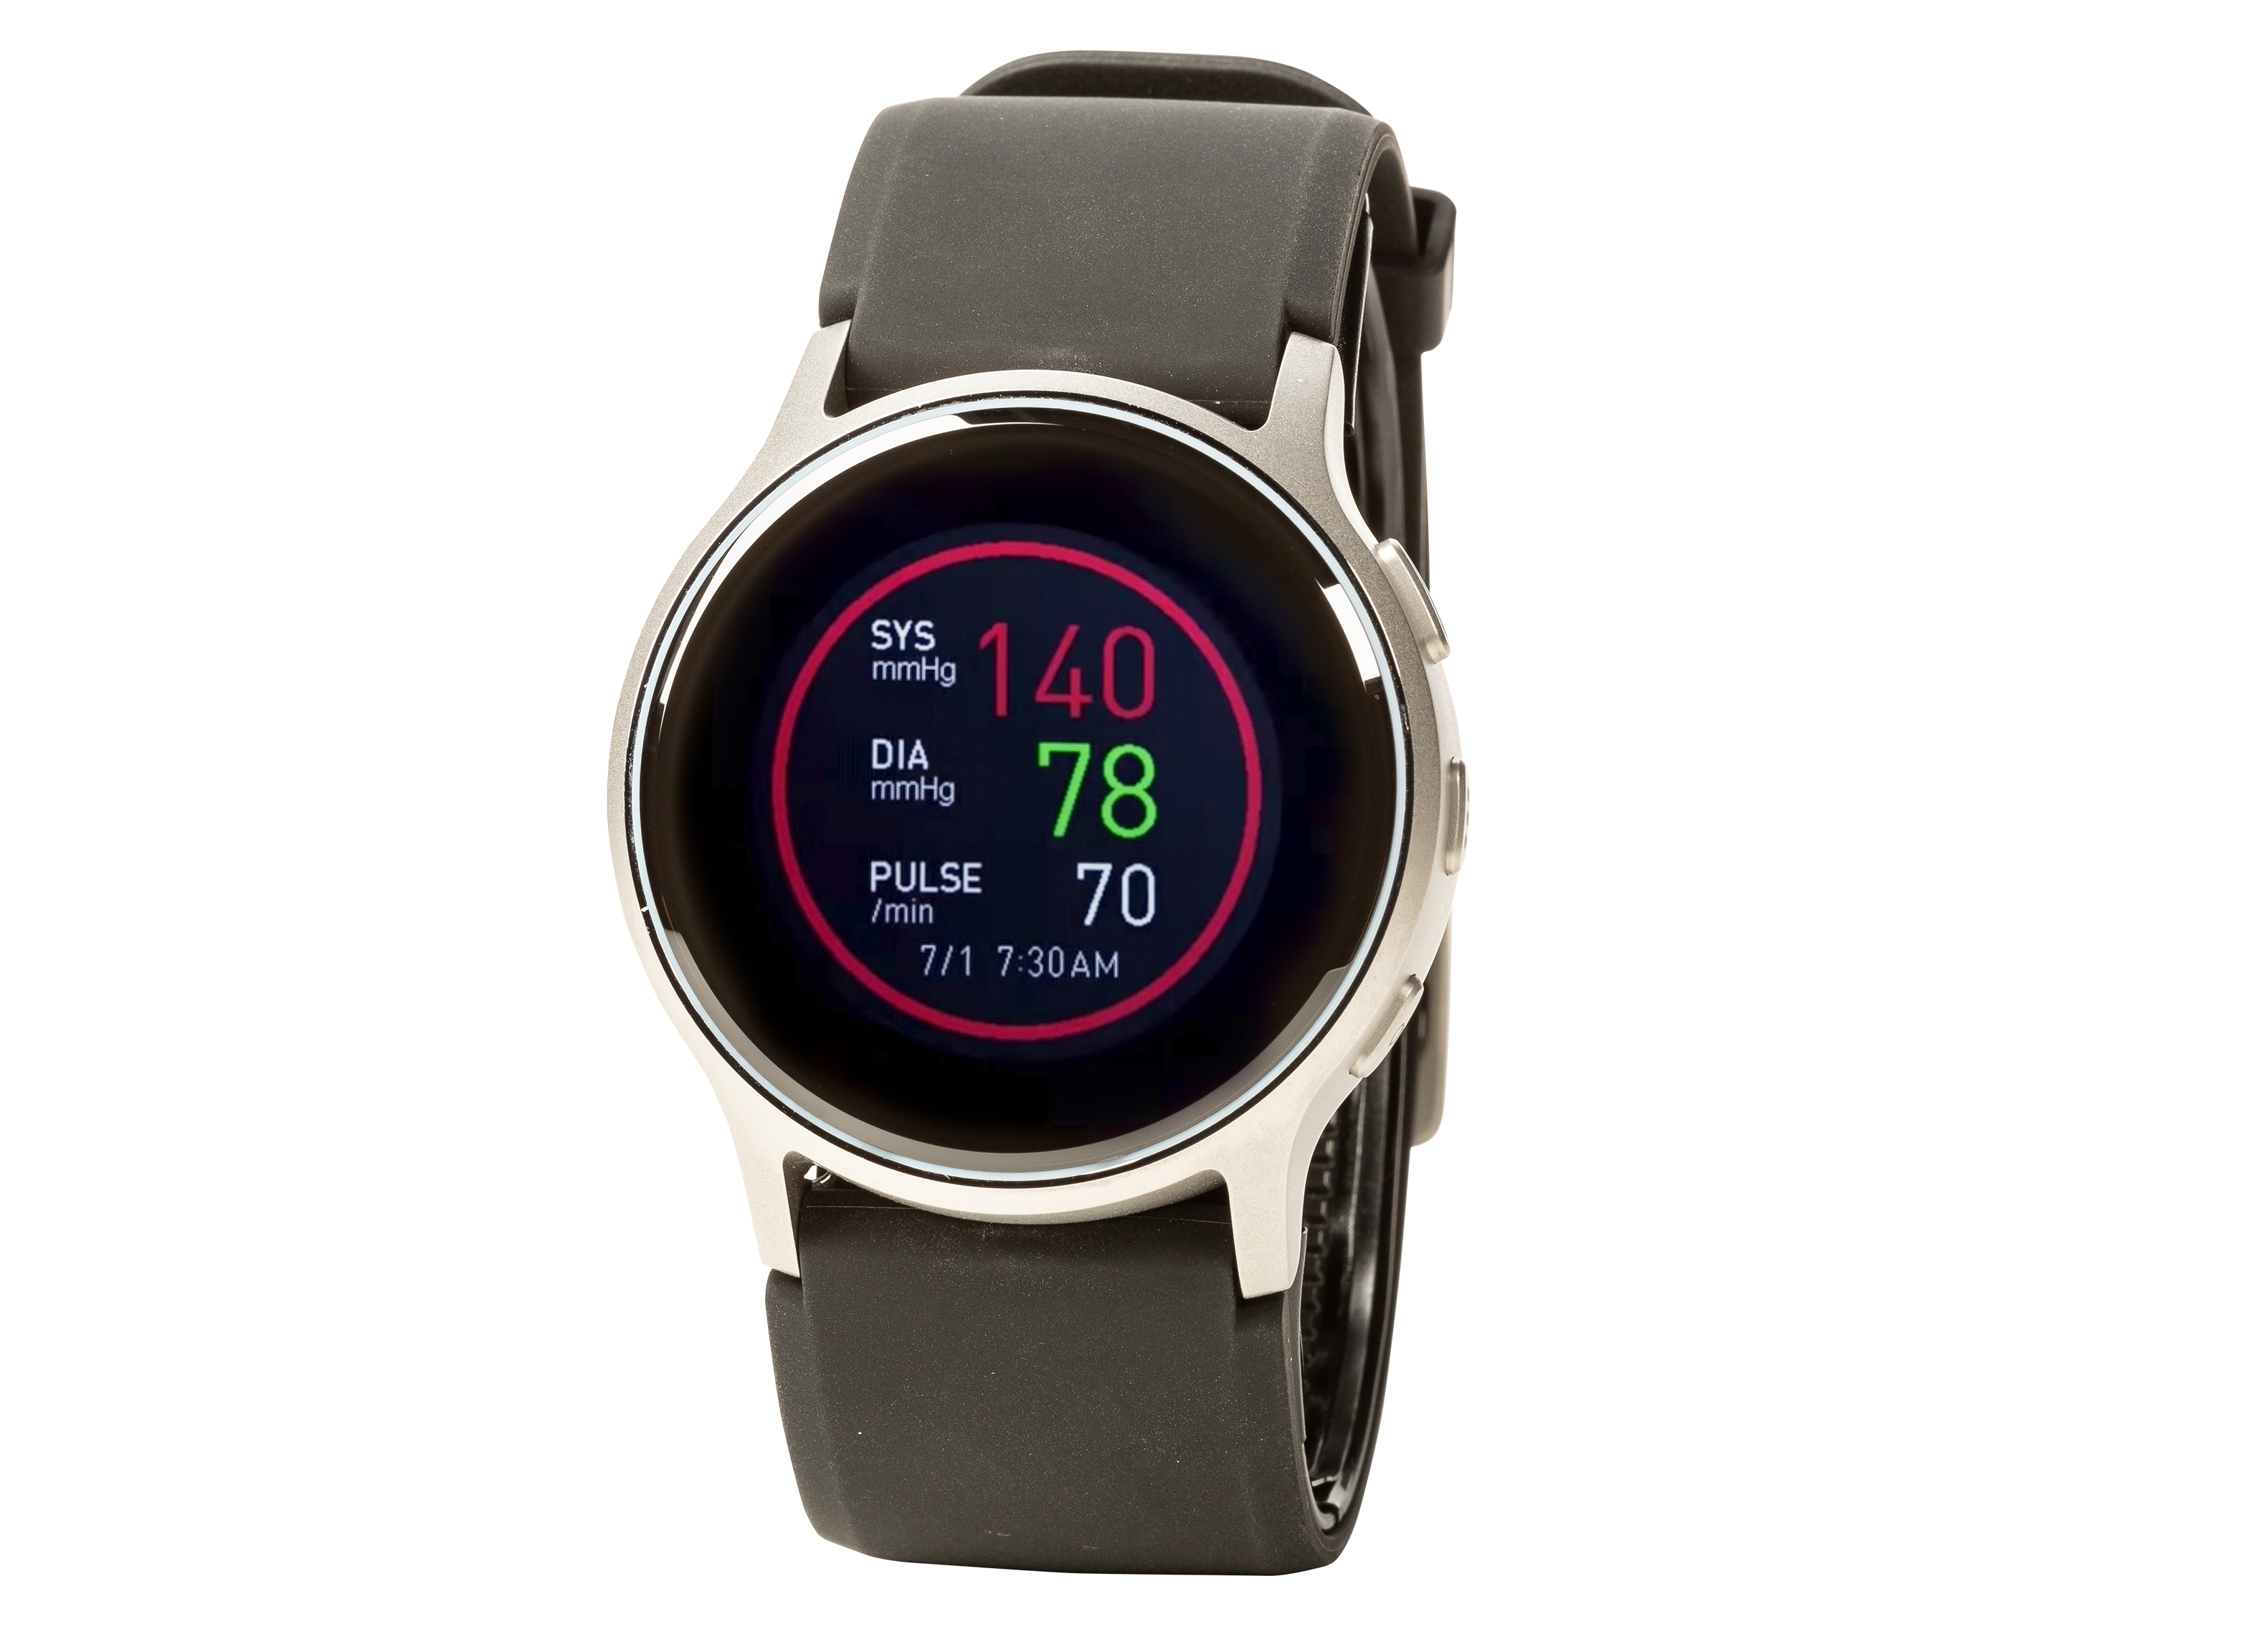 Omron HeartGuide World's First Blood Pressure Smartwatch, Omron Complete  Blood Pressure with EKG 